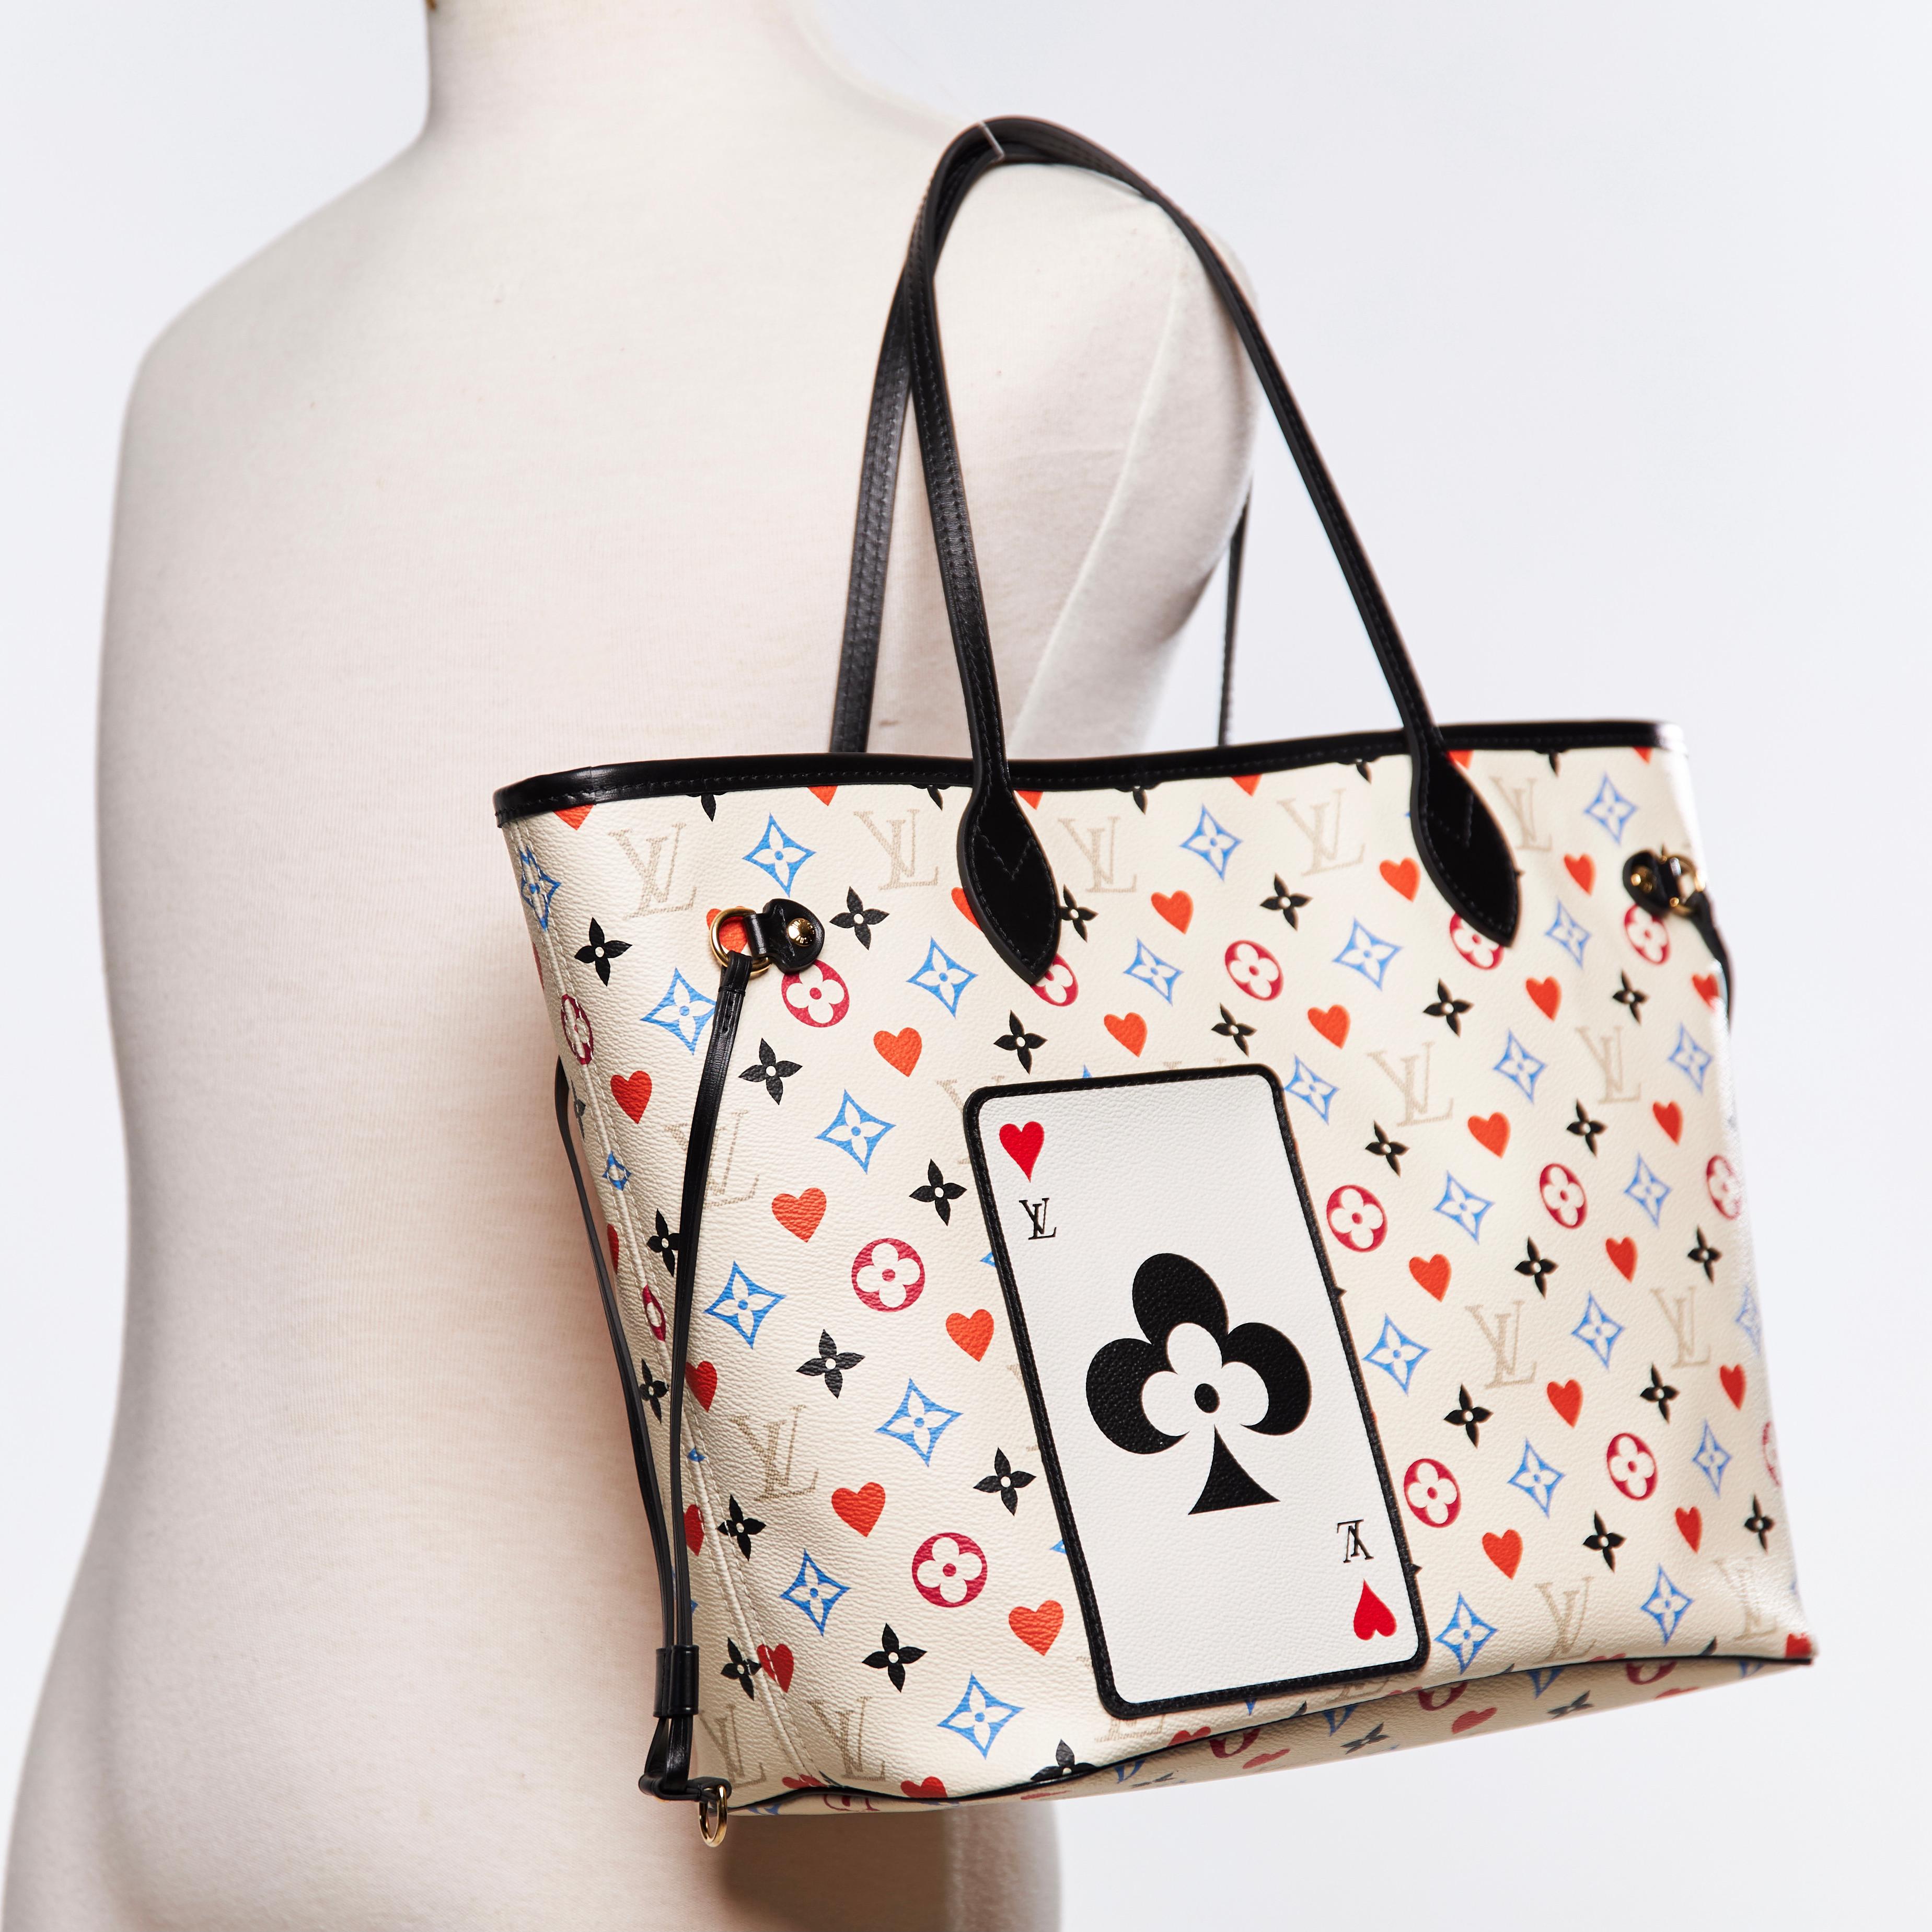 This tote bag is made of Louis Vuitton monogram on coated canvas in white with red hearts and multicolor monograms. The bag features flat black leather top handles, side cinch cords, and polished brass hardware. The top opens to a spacious black